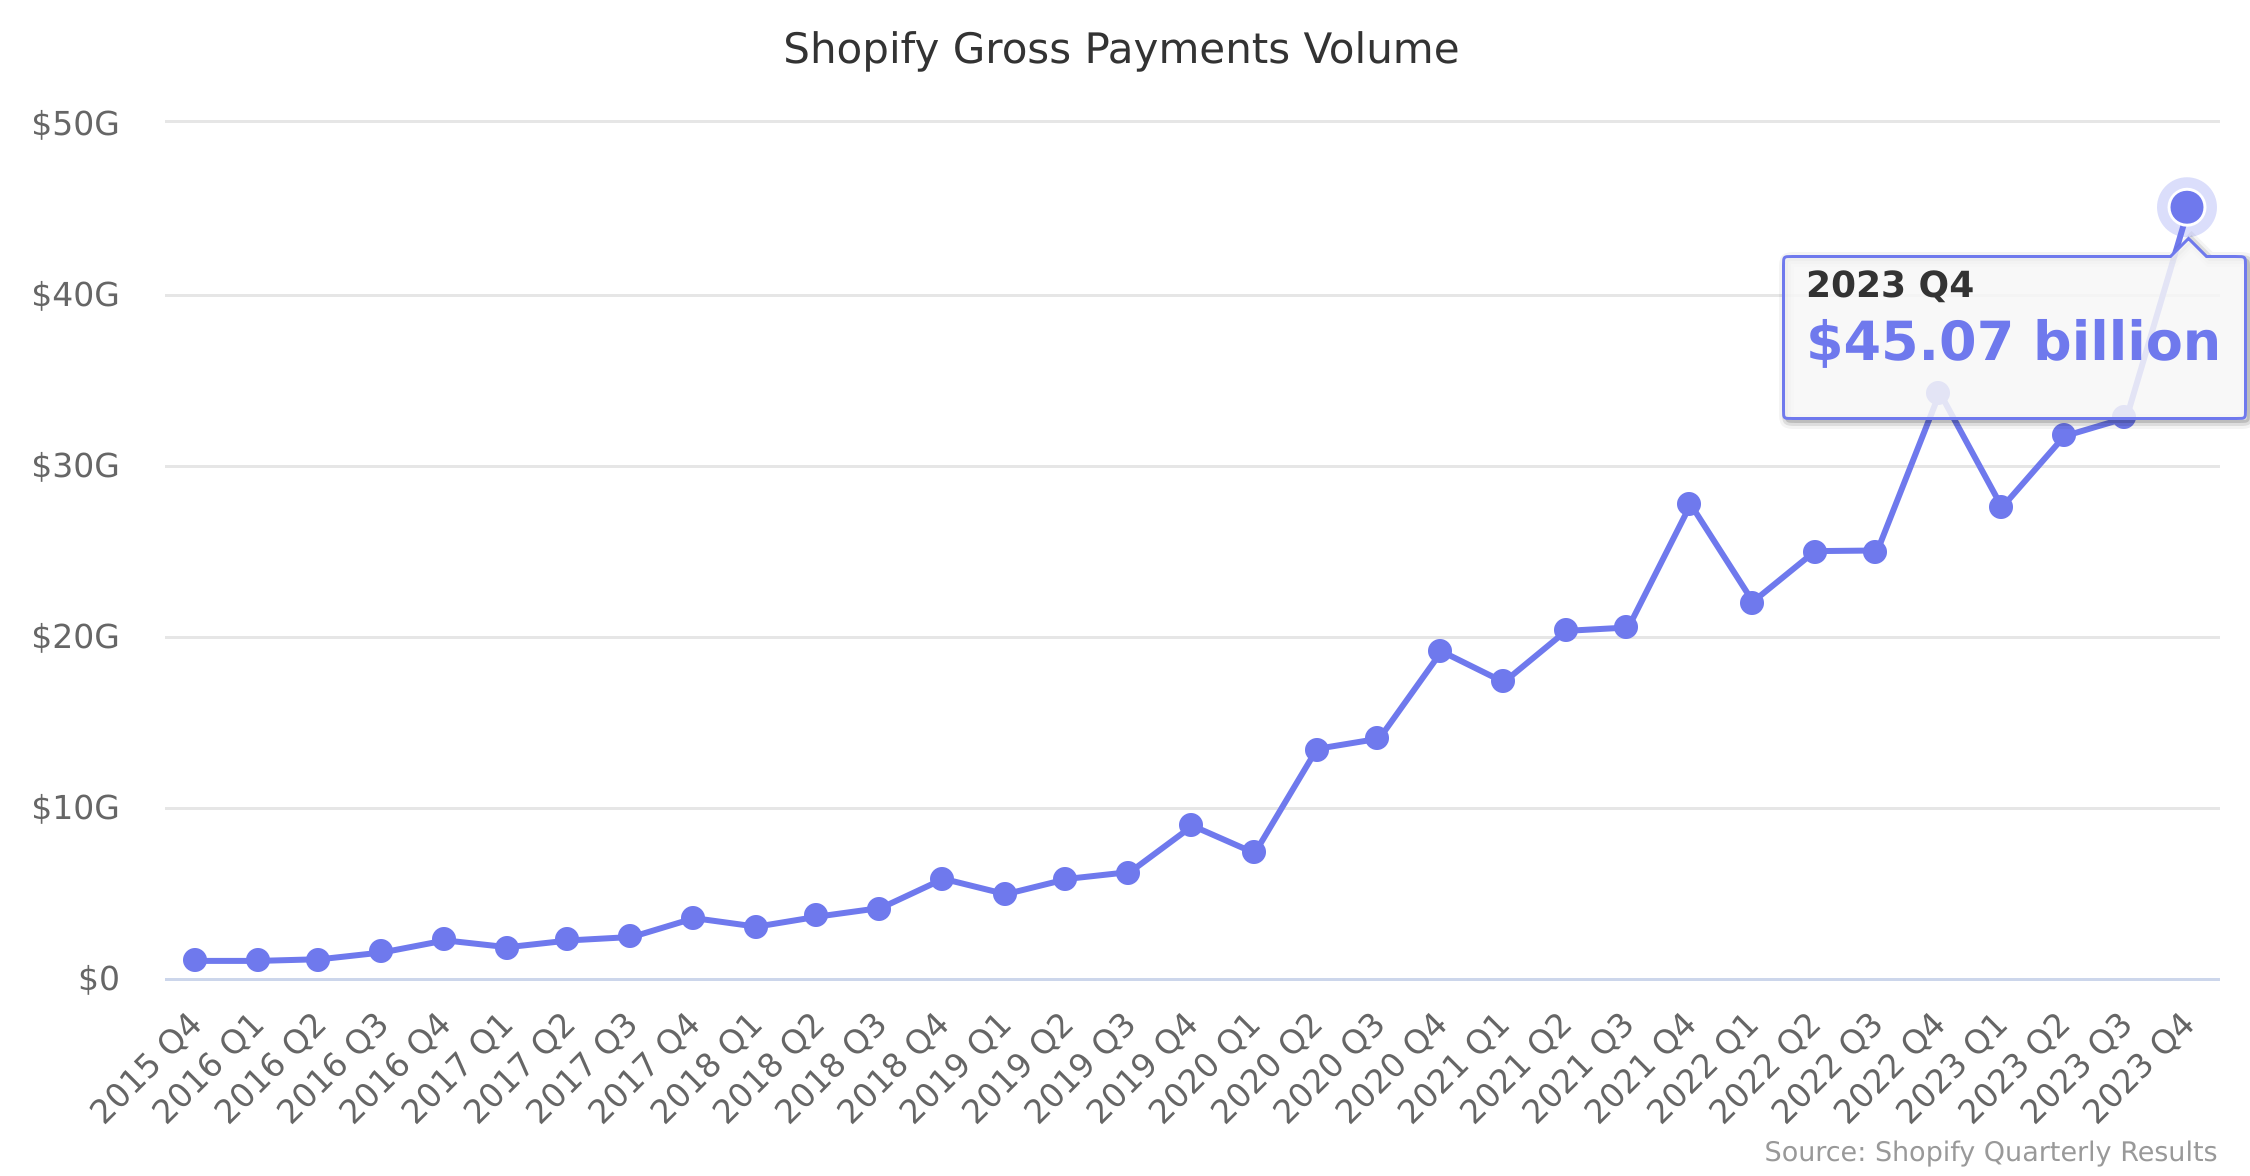 Shopify Gross Payments Volume